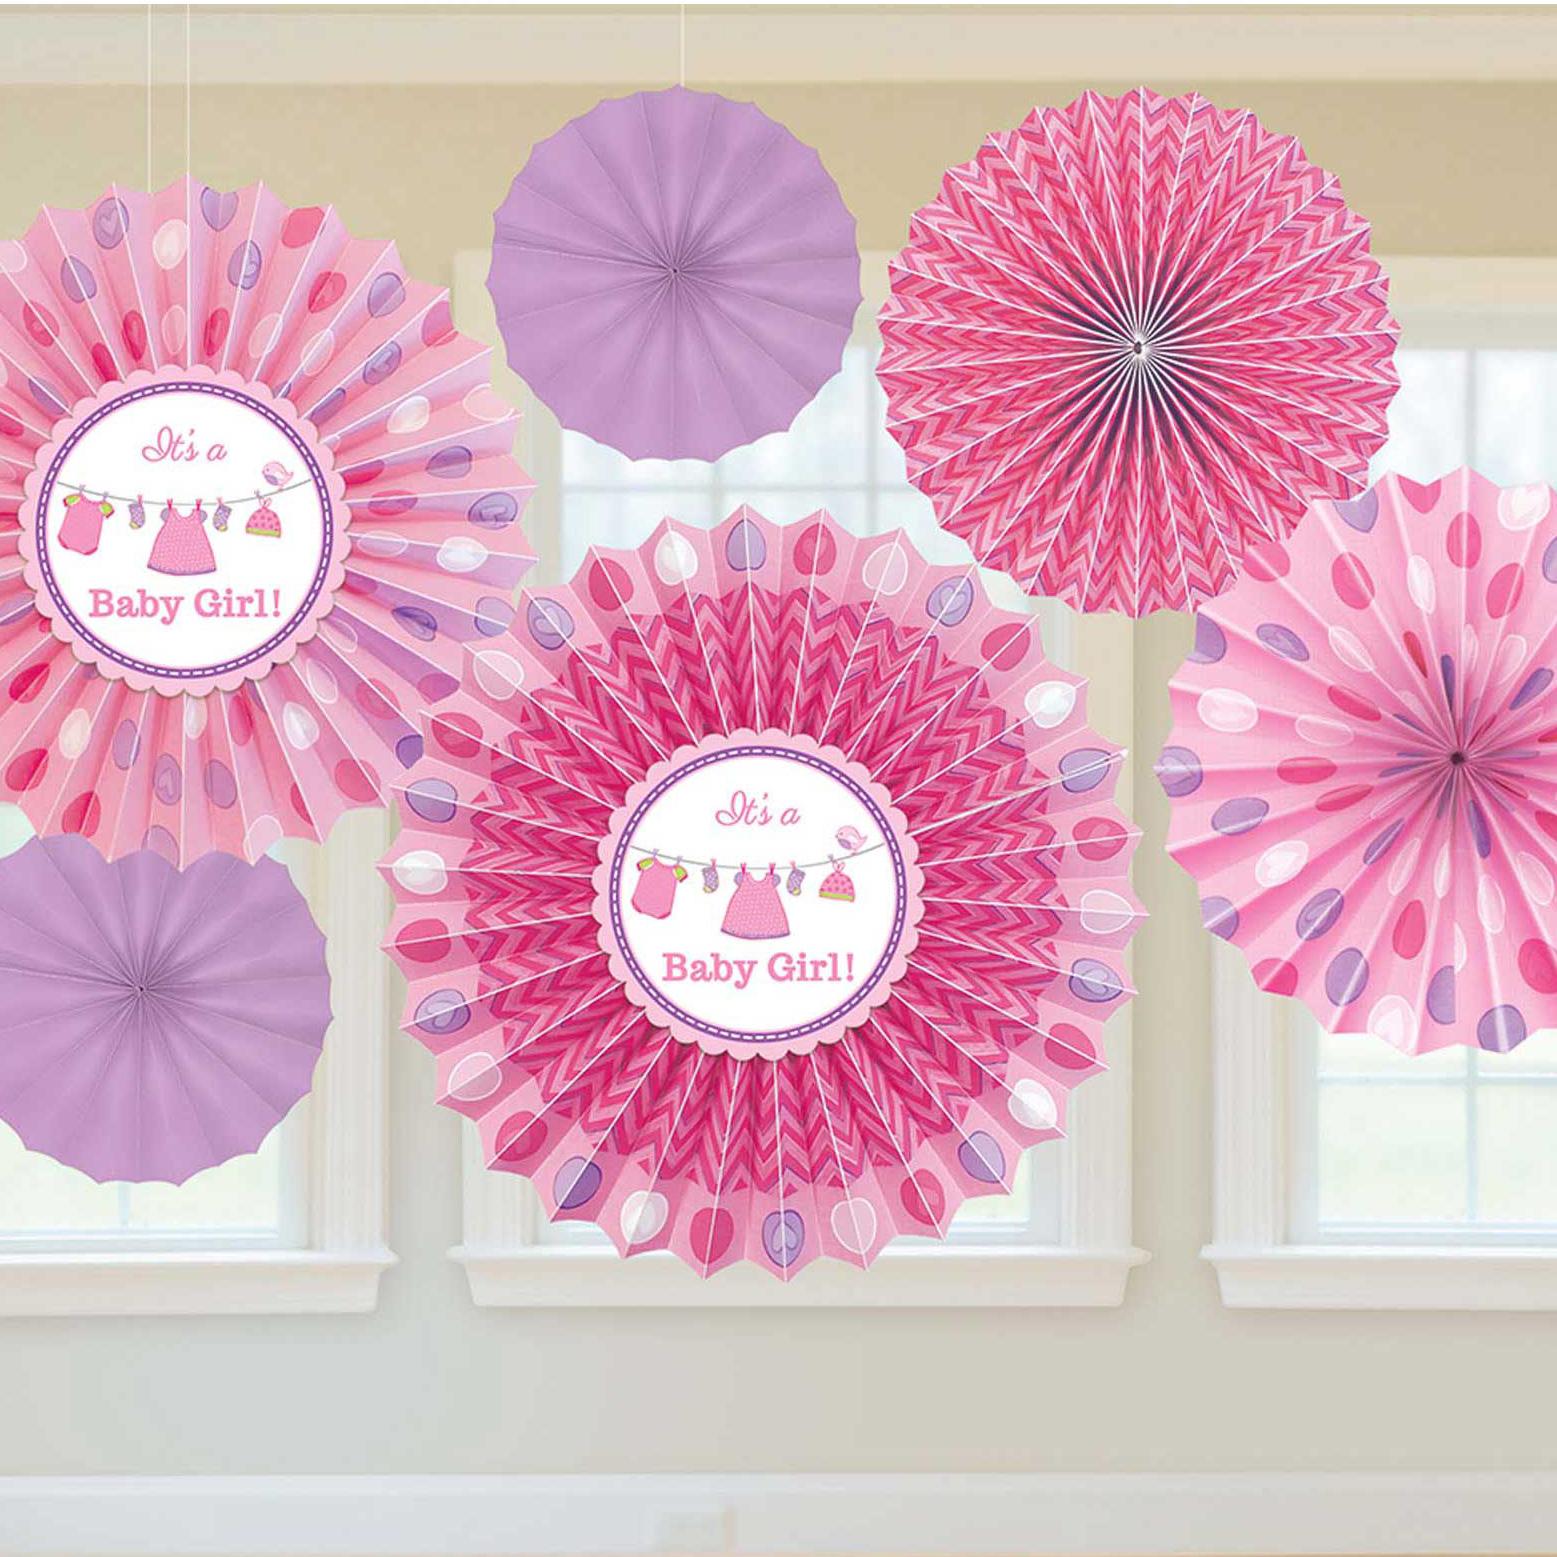 Shower With Love Girl Paper Fan Decorations 6pcs - Party Centre